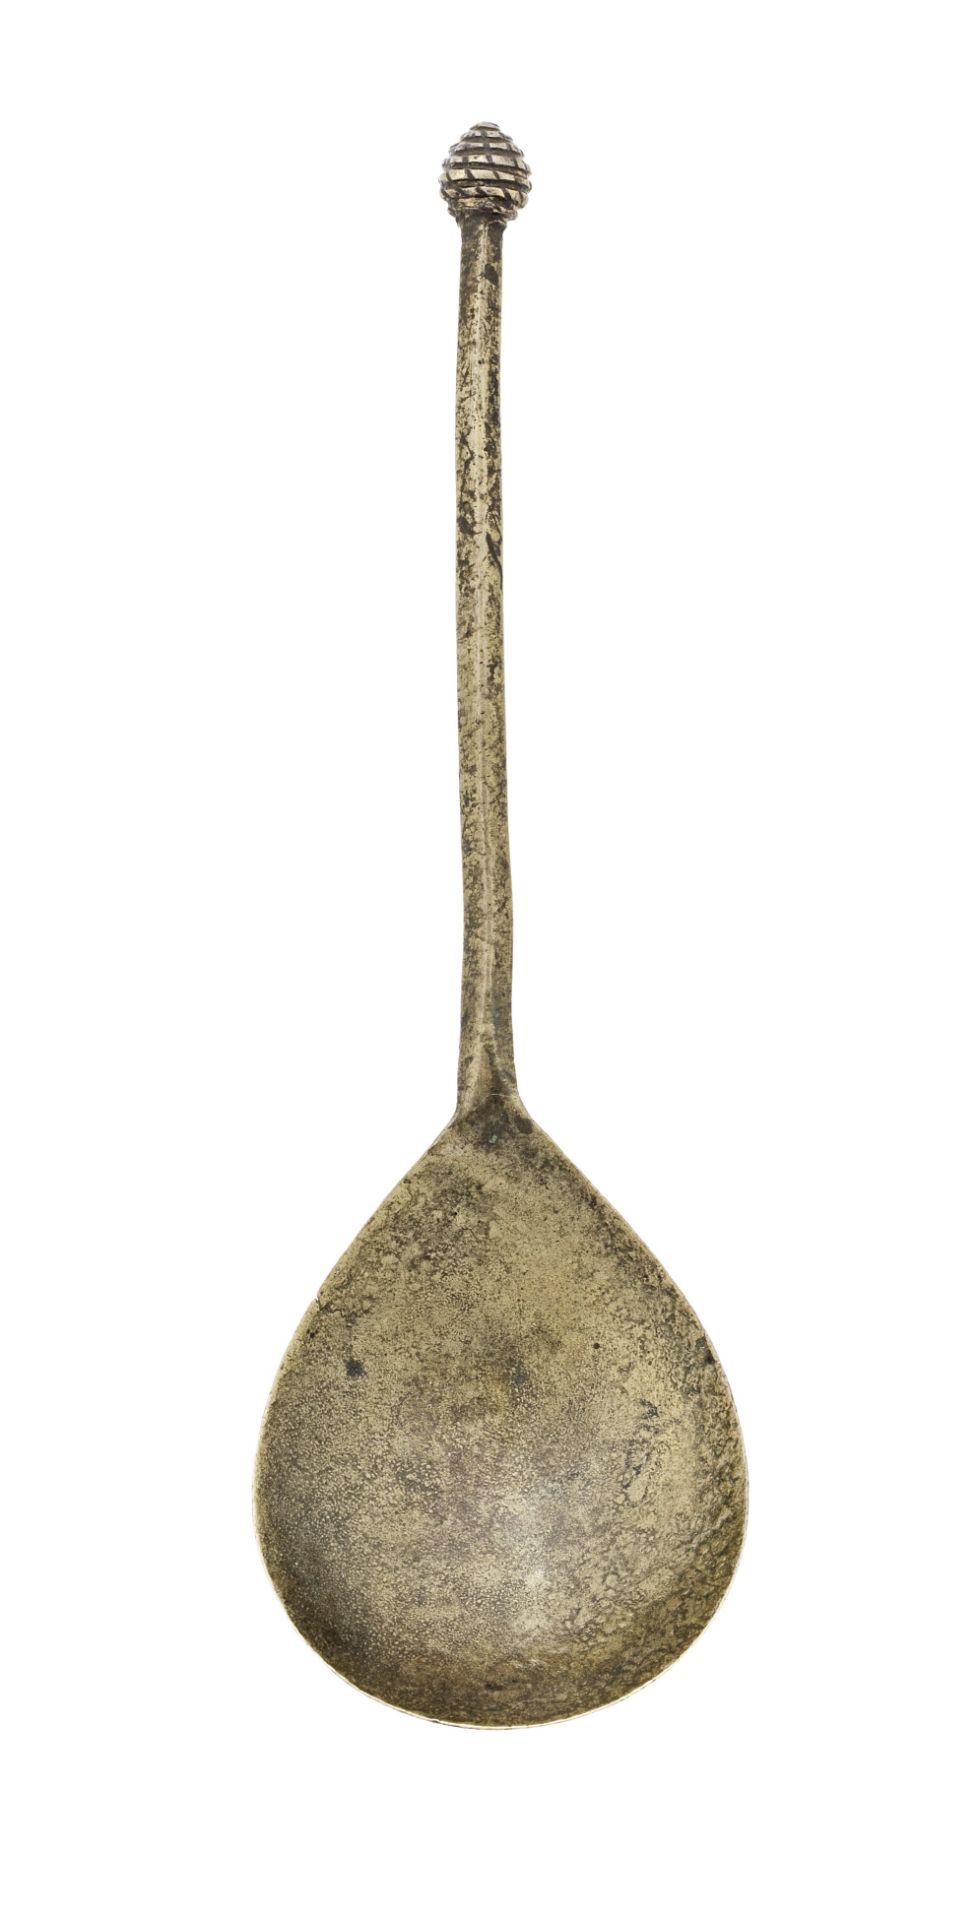 A rare and documented latten beehive knop spoon, circa 1450